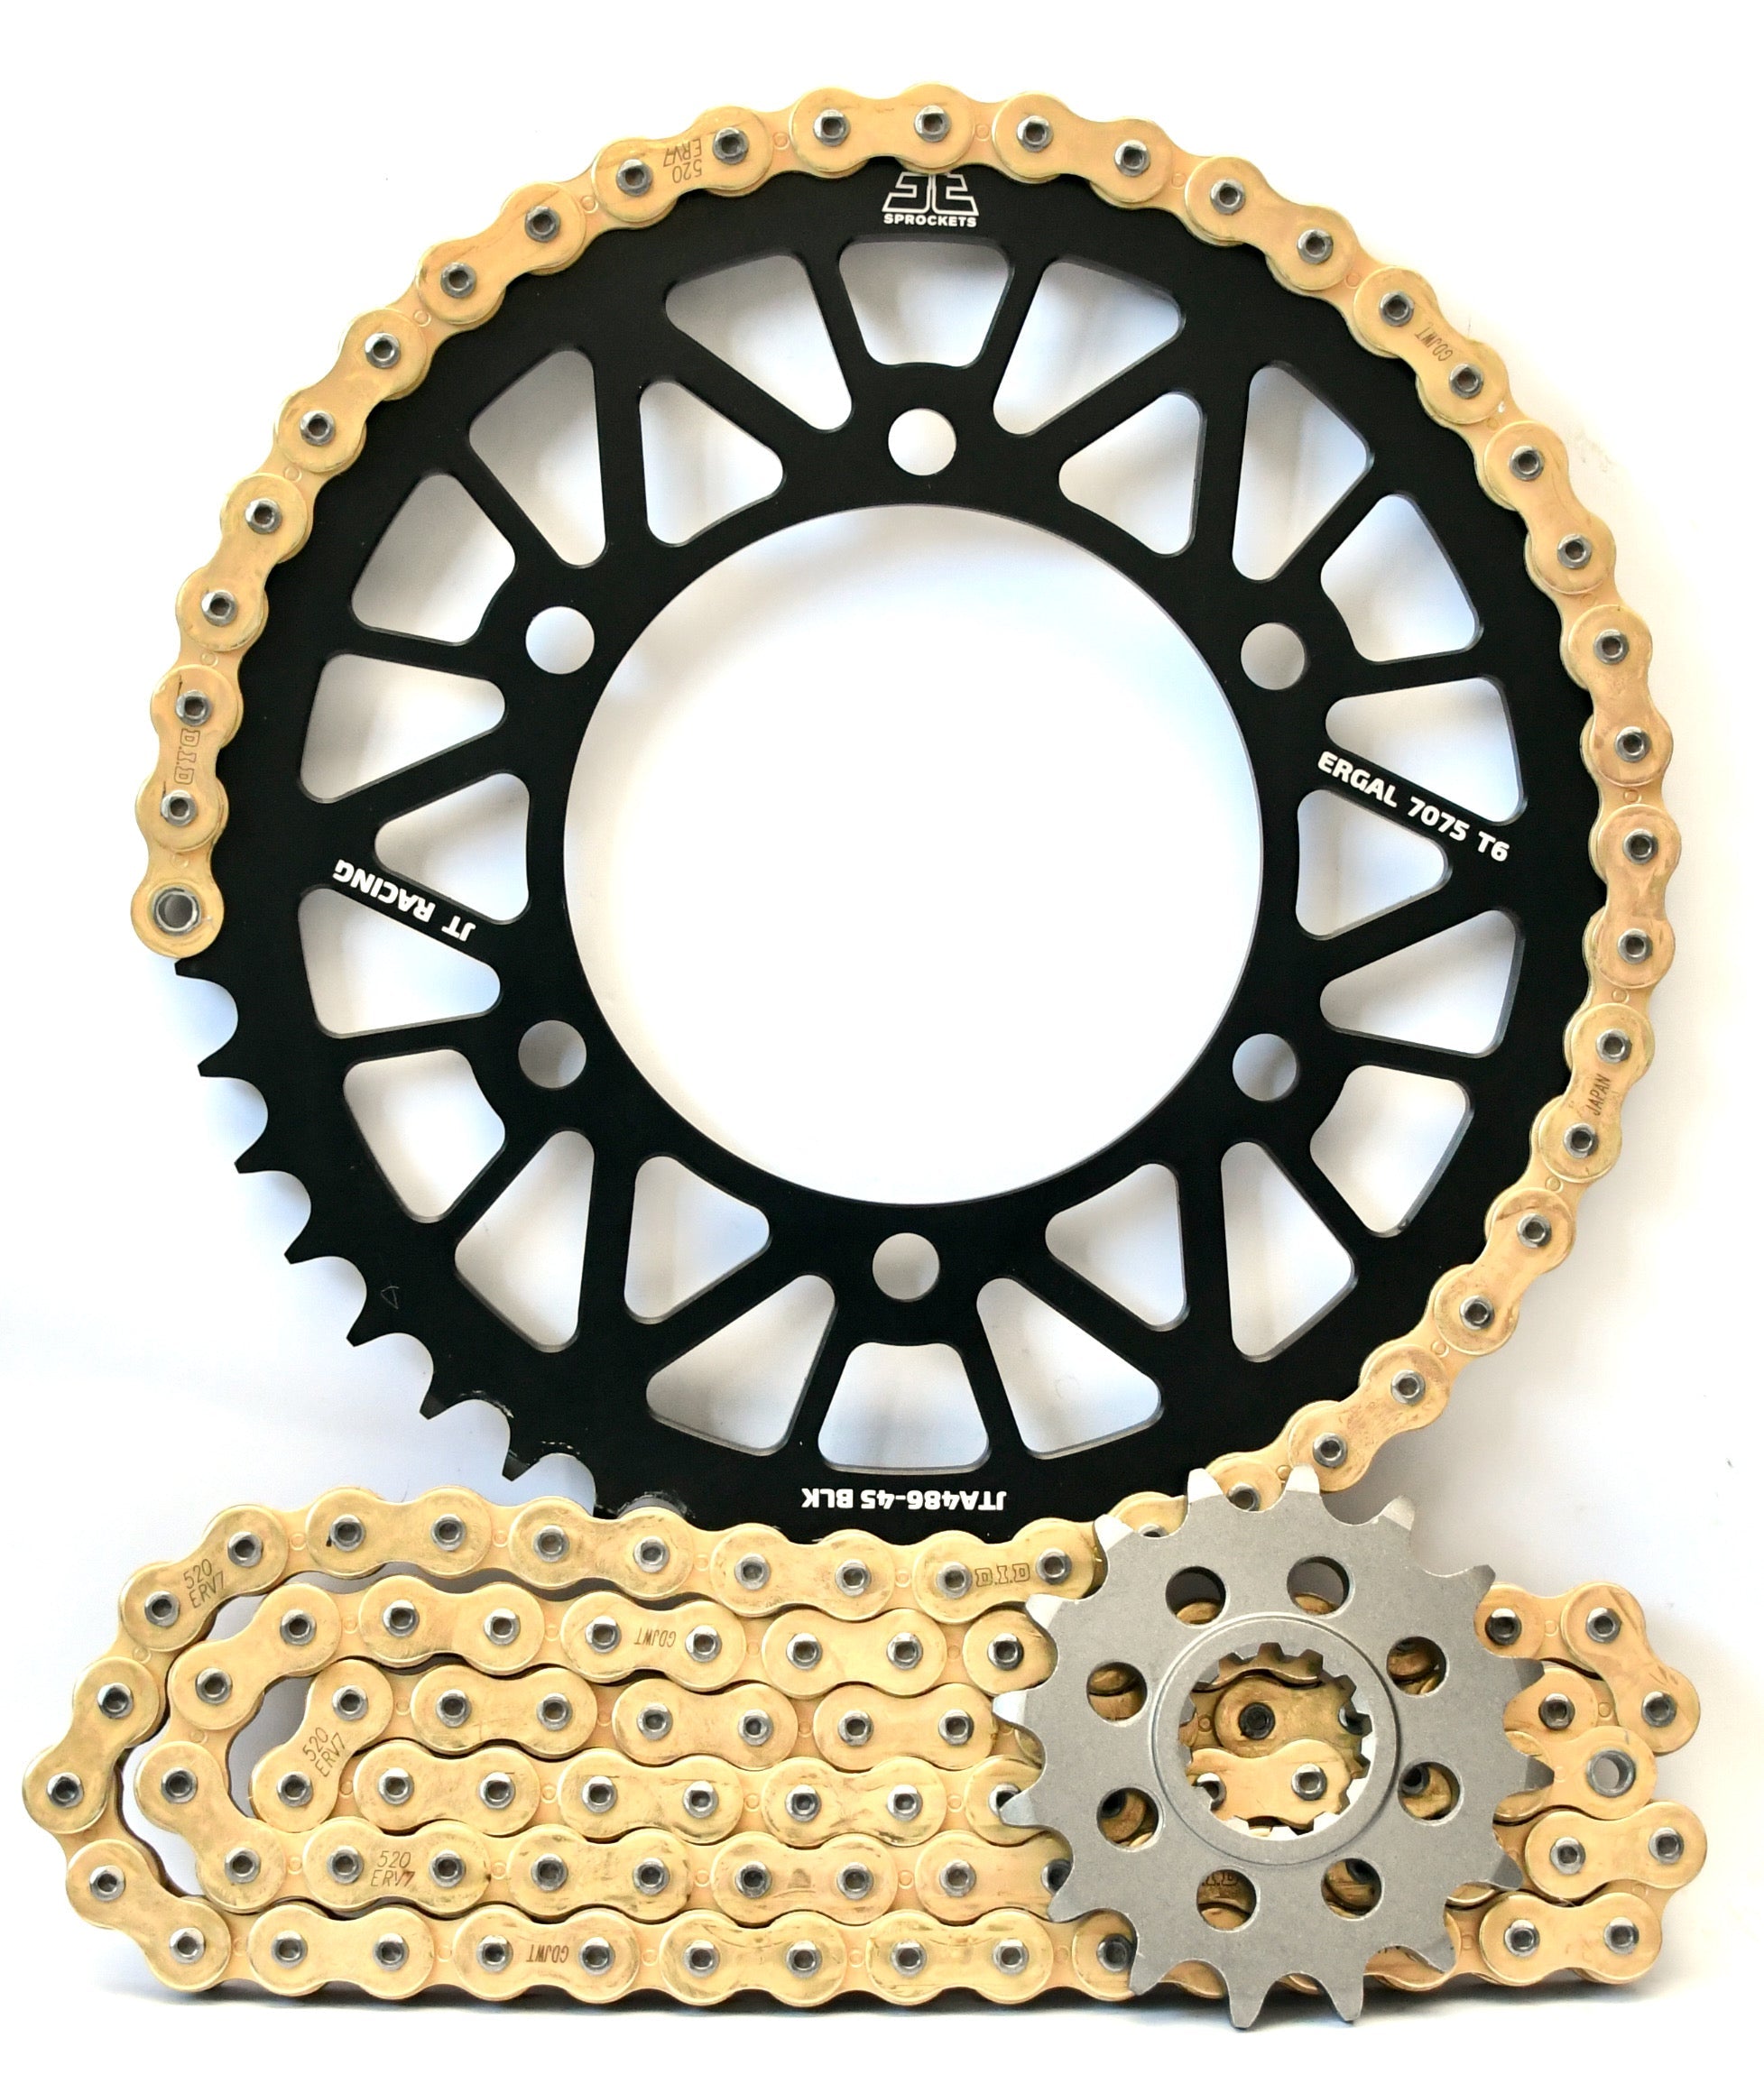 JT Racelite and DID 520 Conversion Chain & Sprocket Kit for BMW S1000RR 2009-2018 - Choose Your Gearing